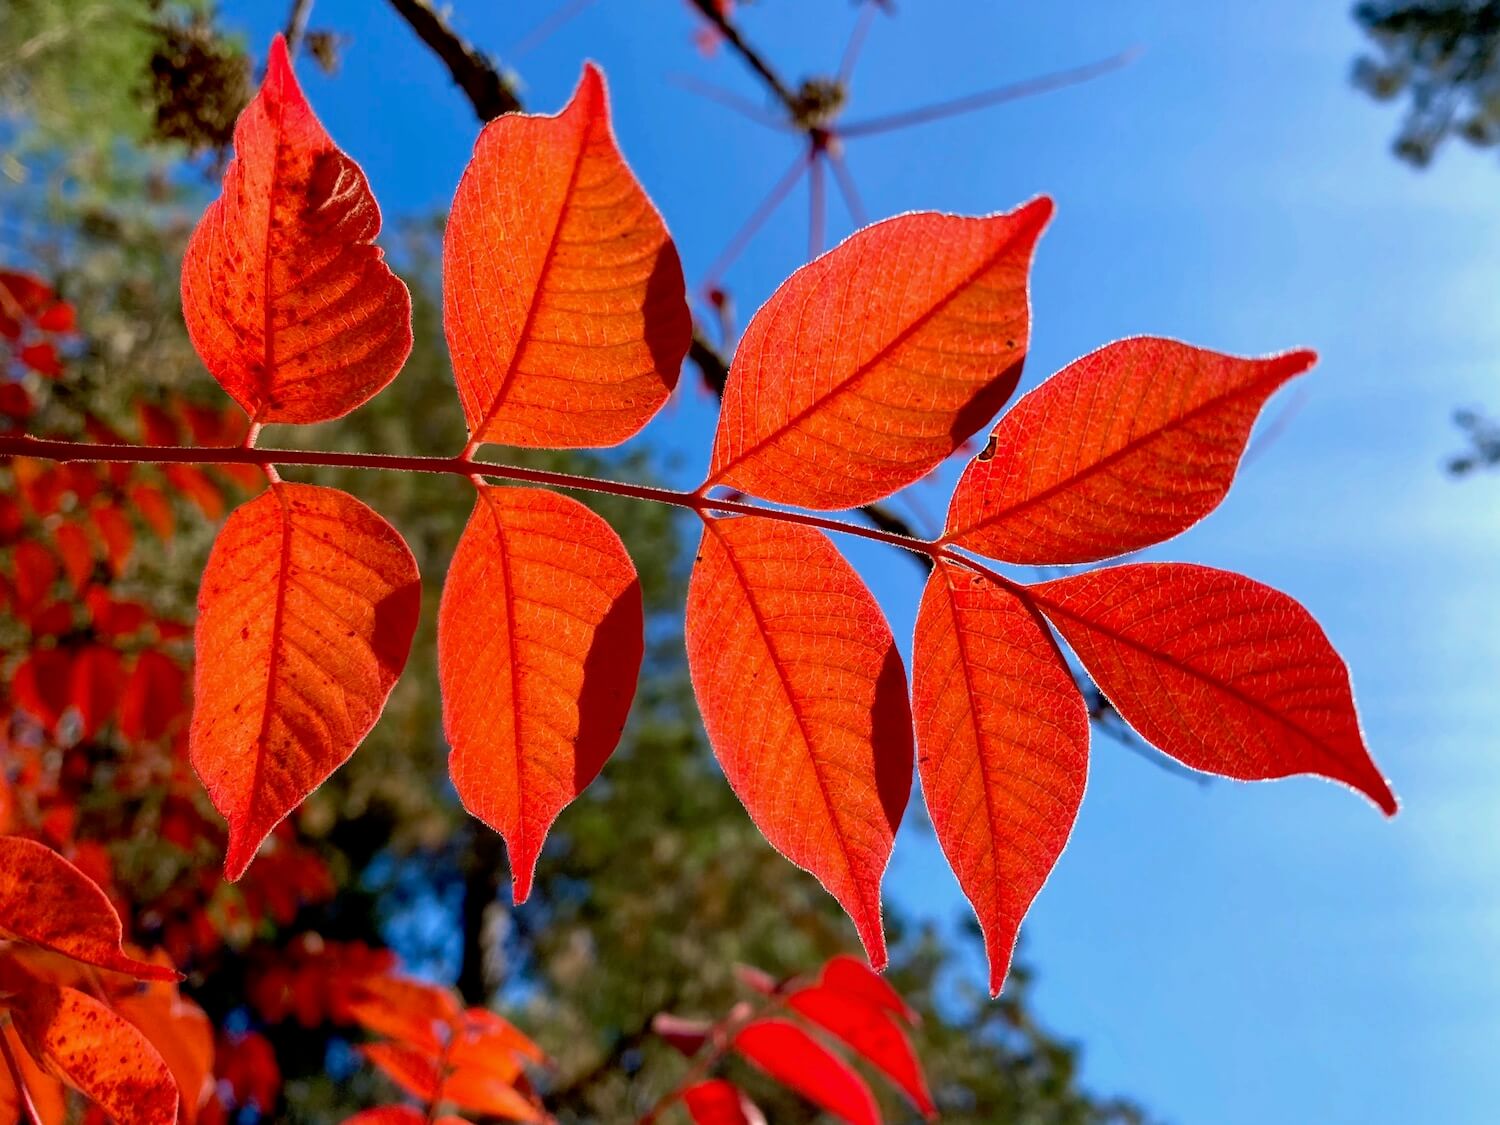 Bright red autumn leaves on a lone tree branch shine in the sun amongst a blue sky backdrop.